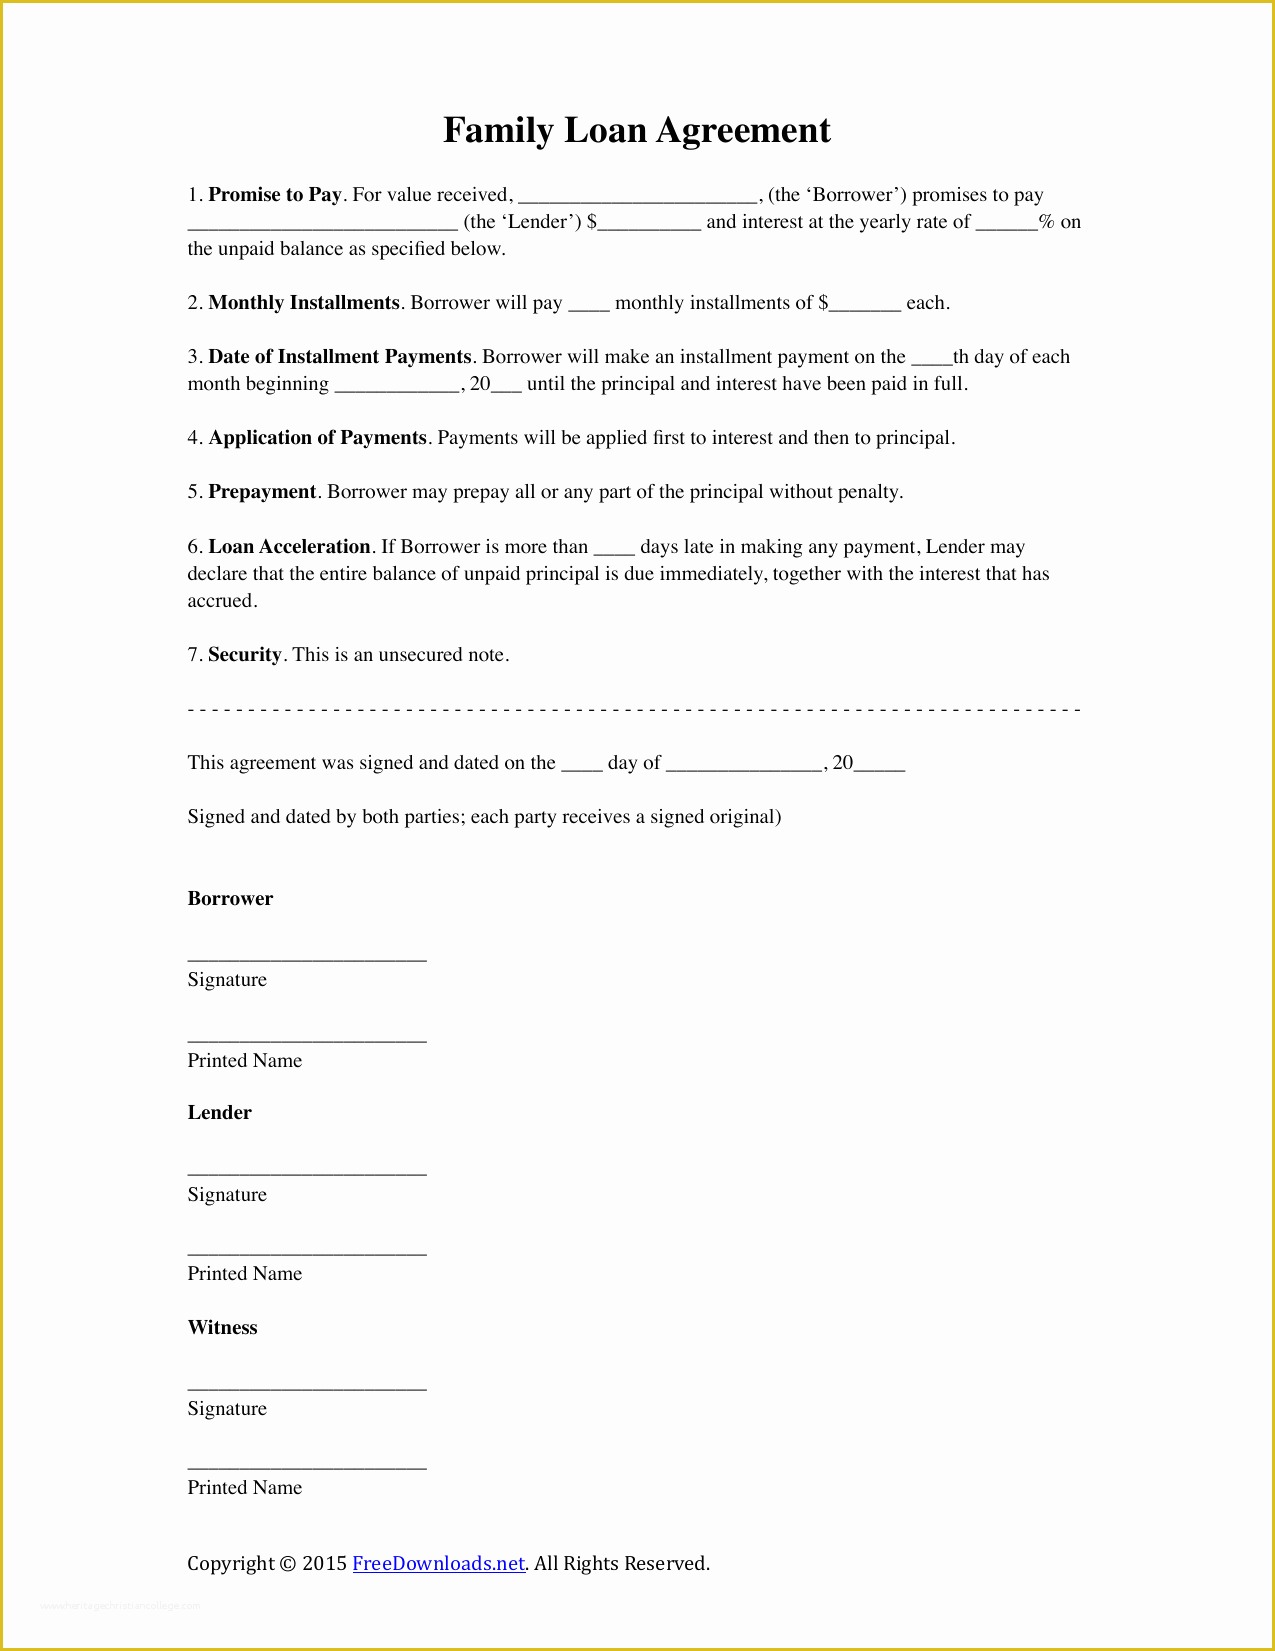 Free Online Loan Agreement Template Of Download Family Loan Agreement Template Pdf Rtf